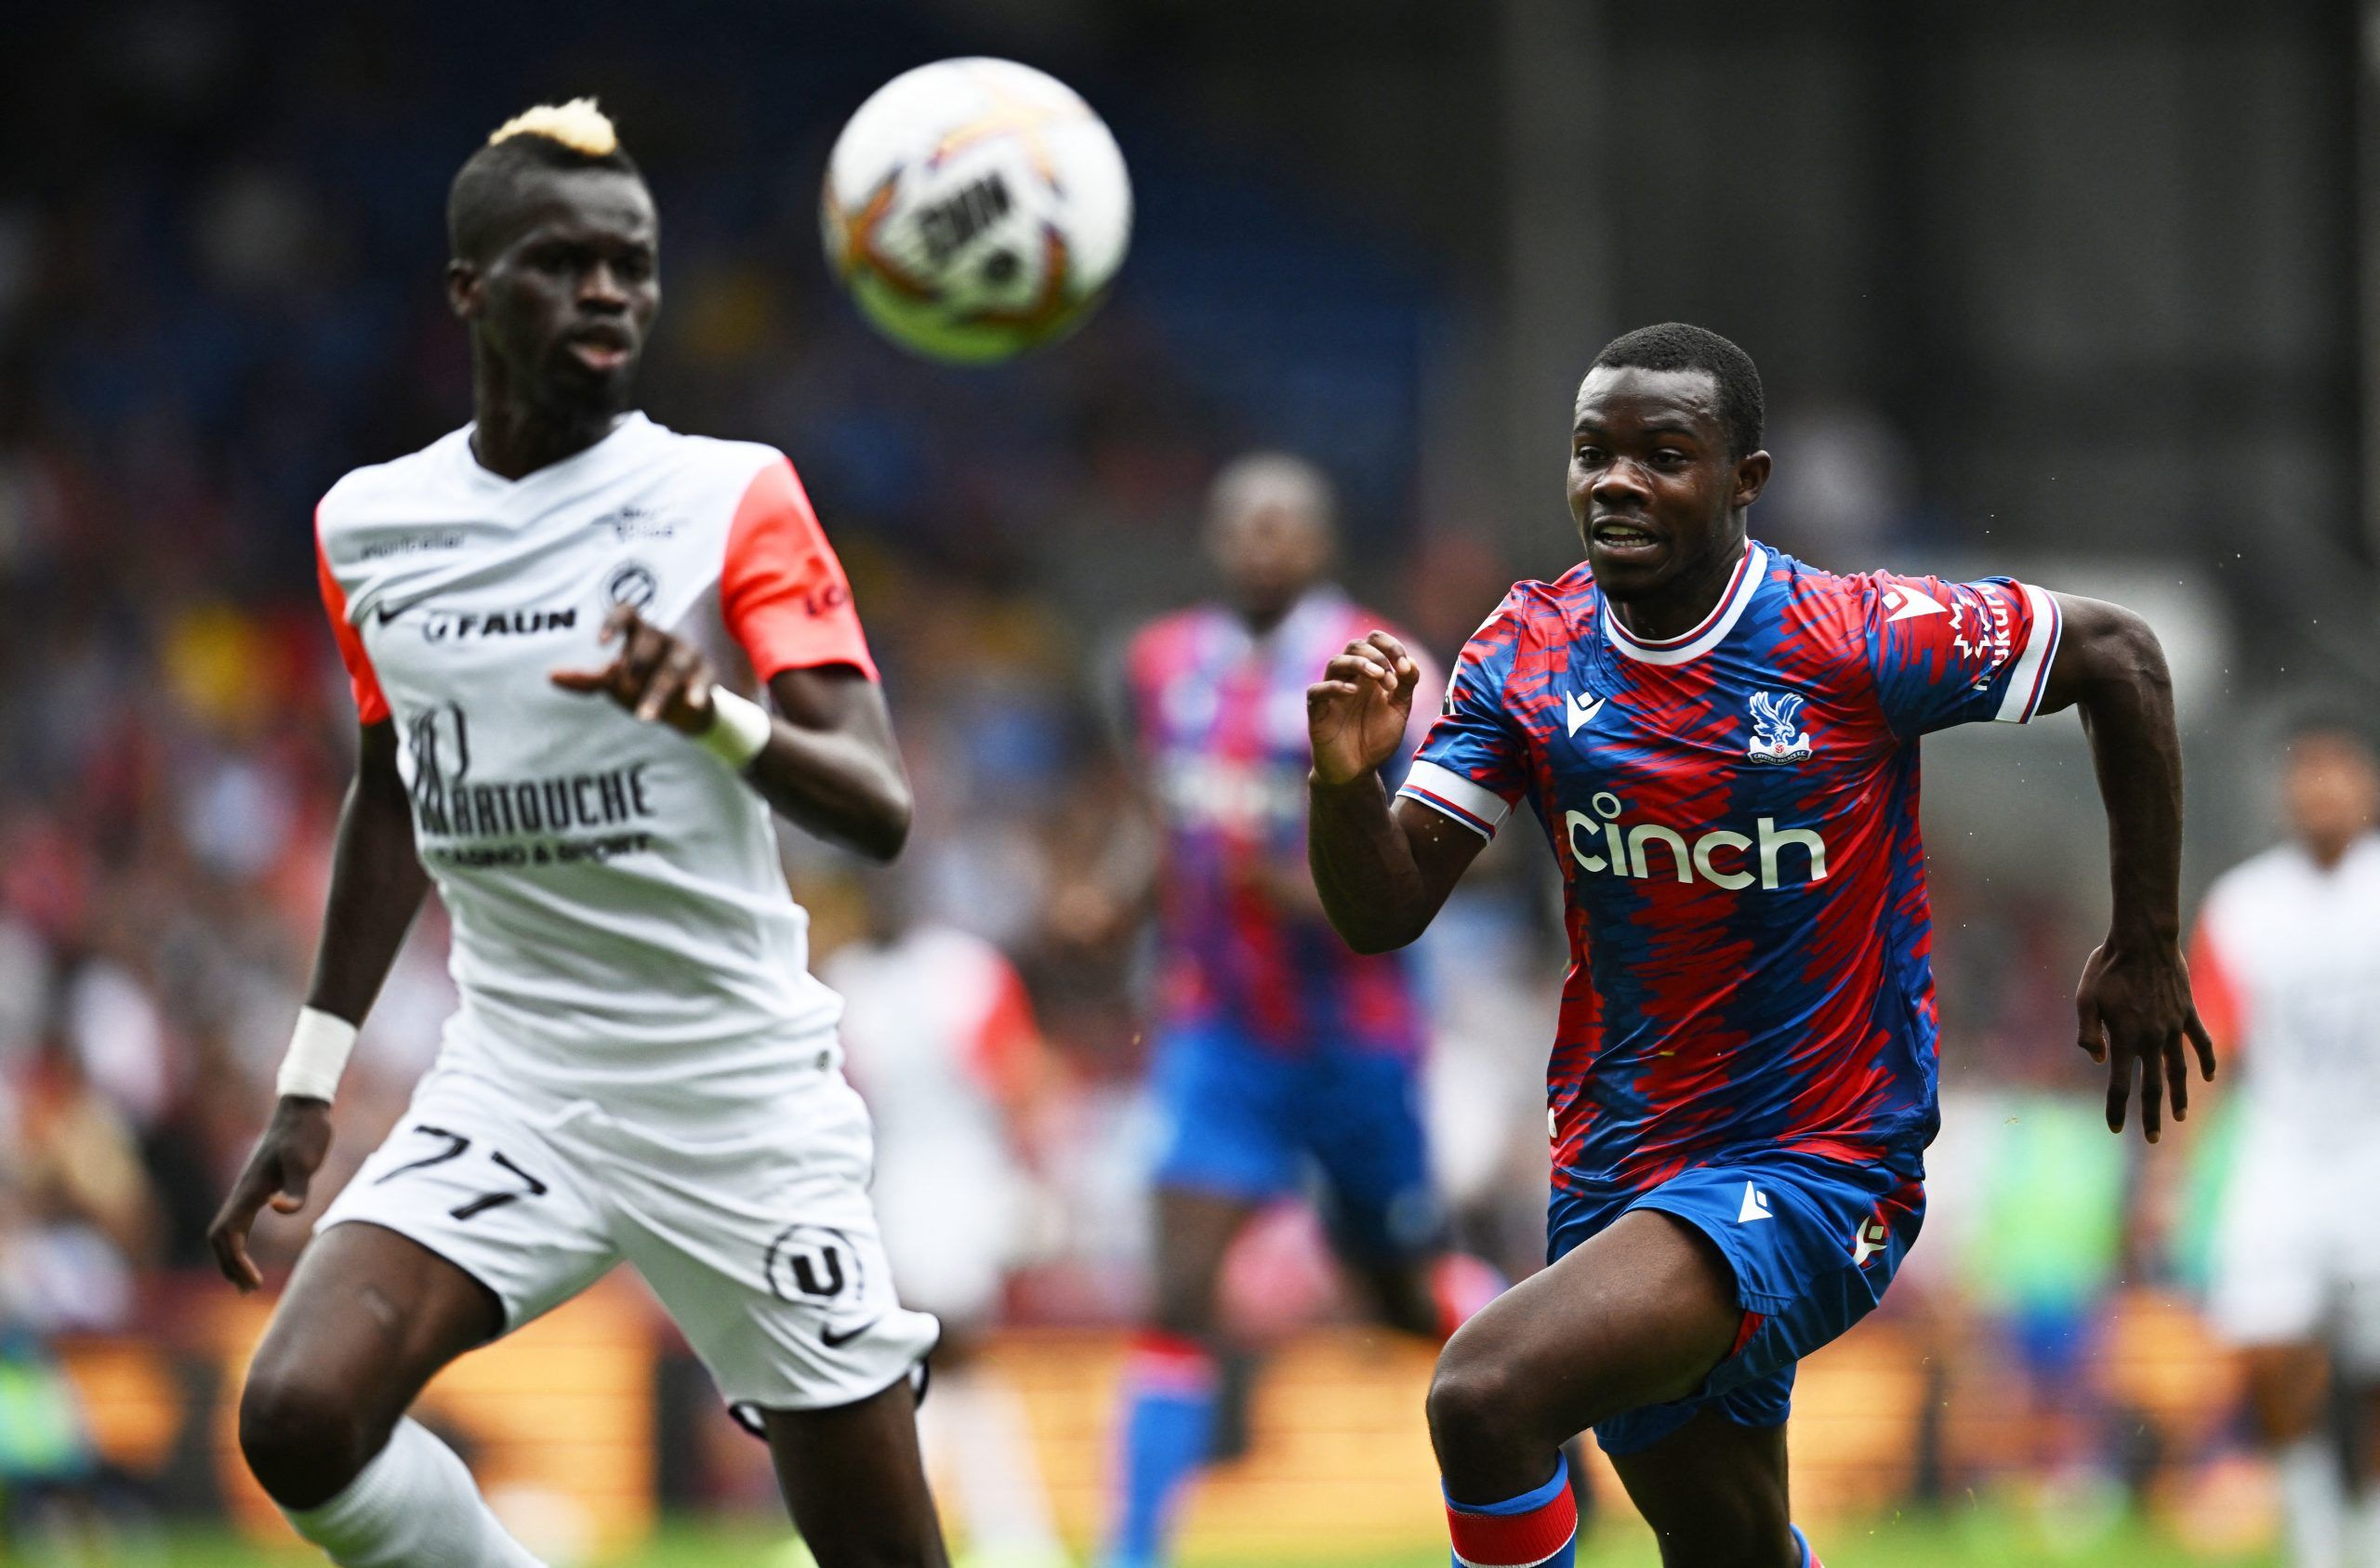 Soccer Football - Pre Season Friendly - Crystal Palace v Montpellier - Selhurst Park, London, Britain - July 30, 2022 Montpellier's Falaye Sacko in action with Crystal Palace's Tyrick Mitchell REUTERS/Dylan Martinez